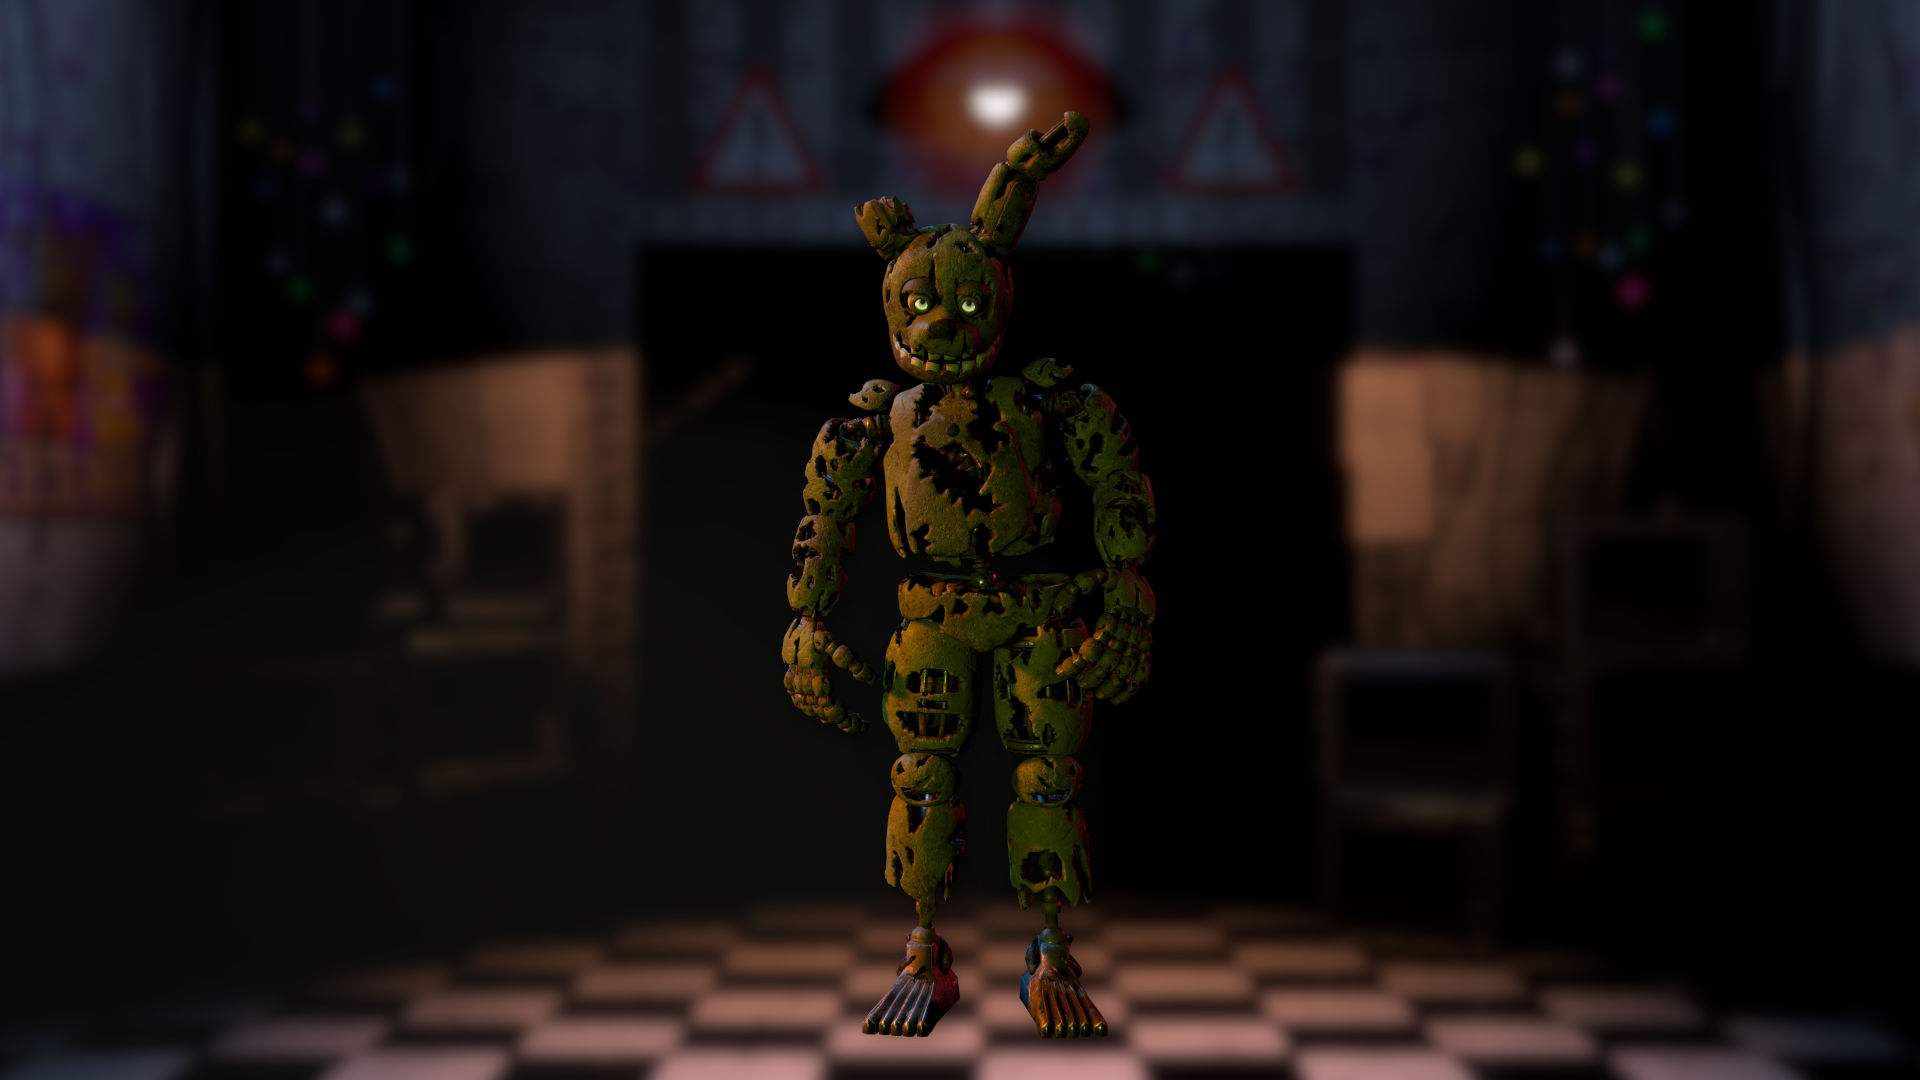 What is your opinion of Springtrap from the video game Five Nights at  Freddy's? - Quora